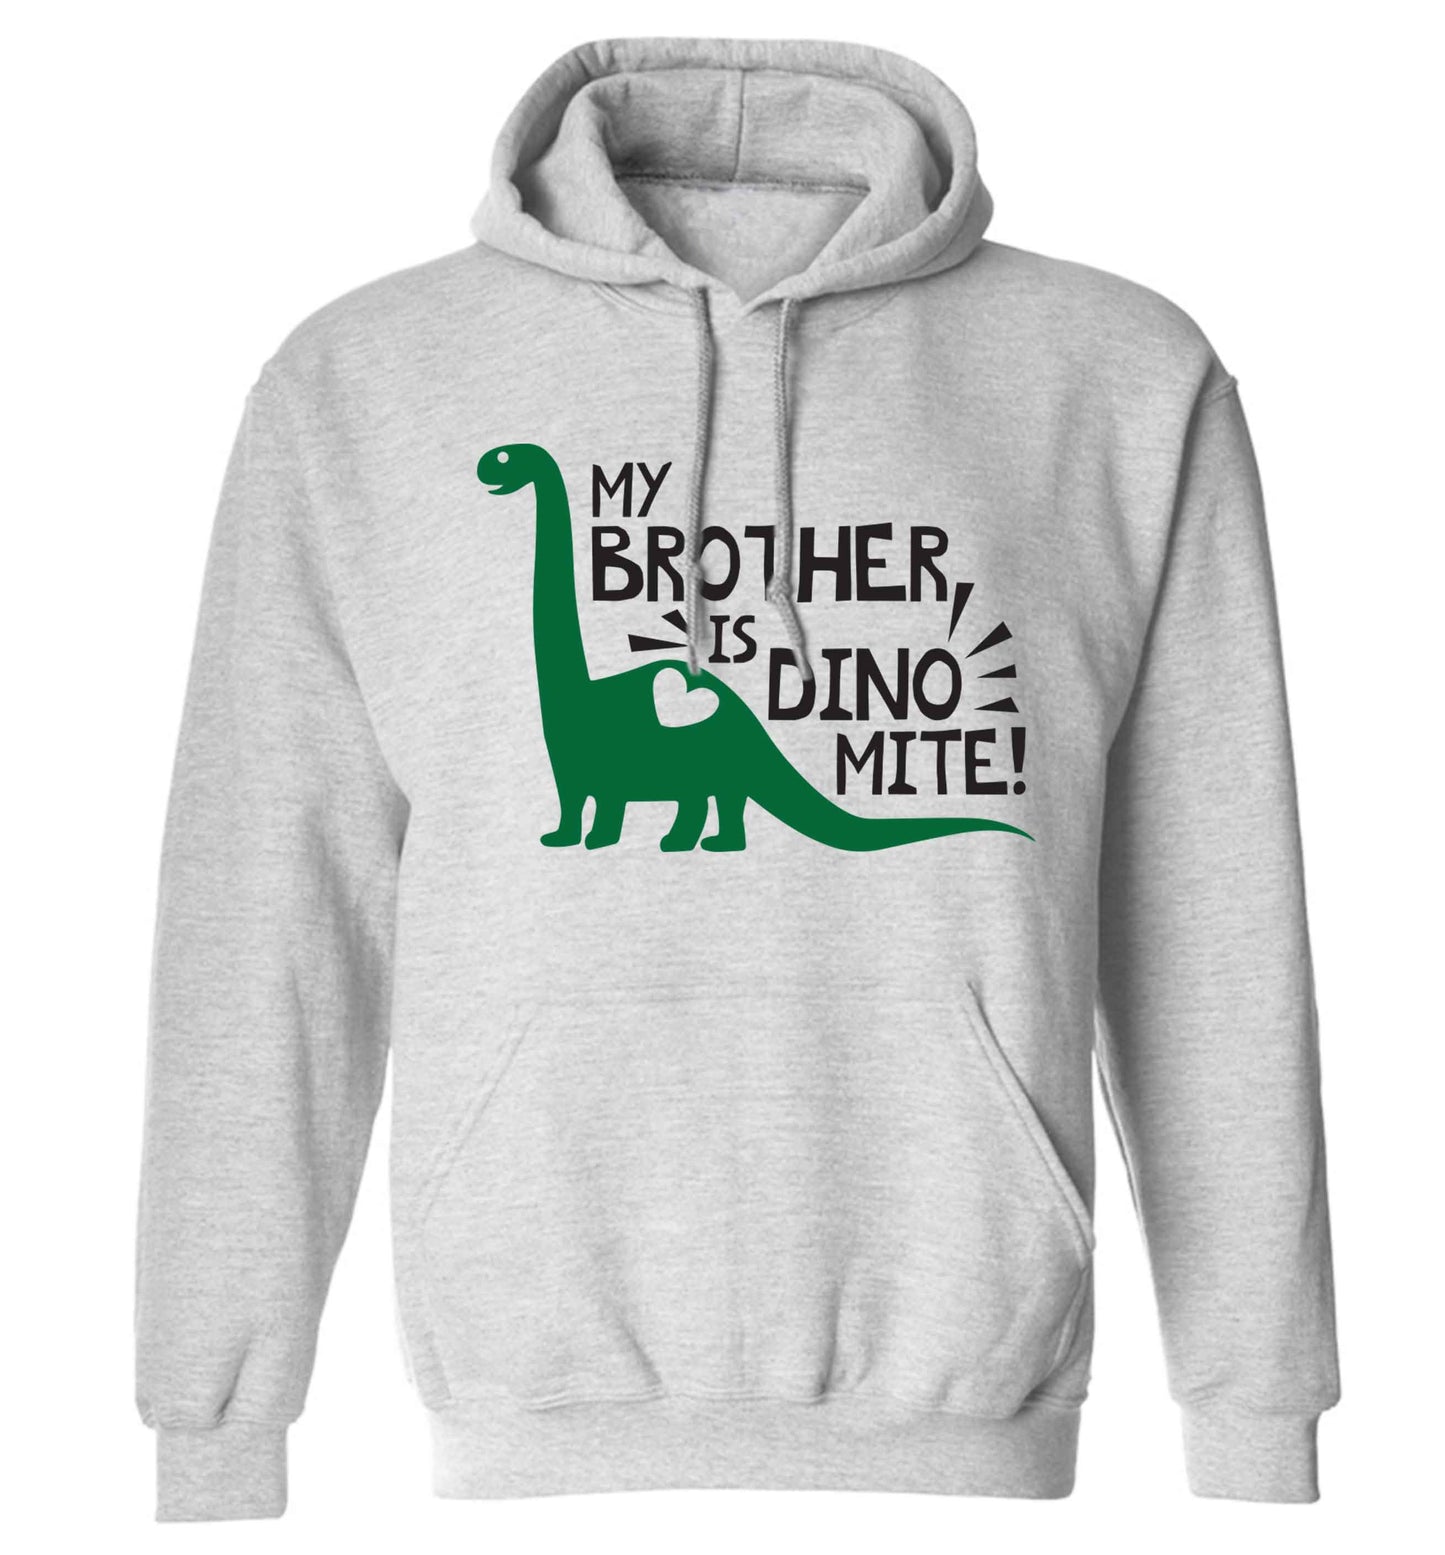 My brother is dinomite! adults unisex grey hoodie 2XL